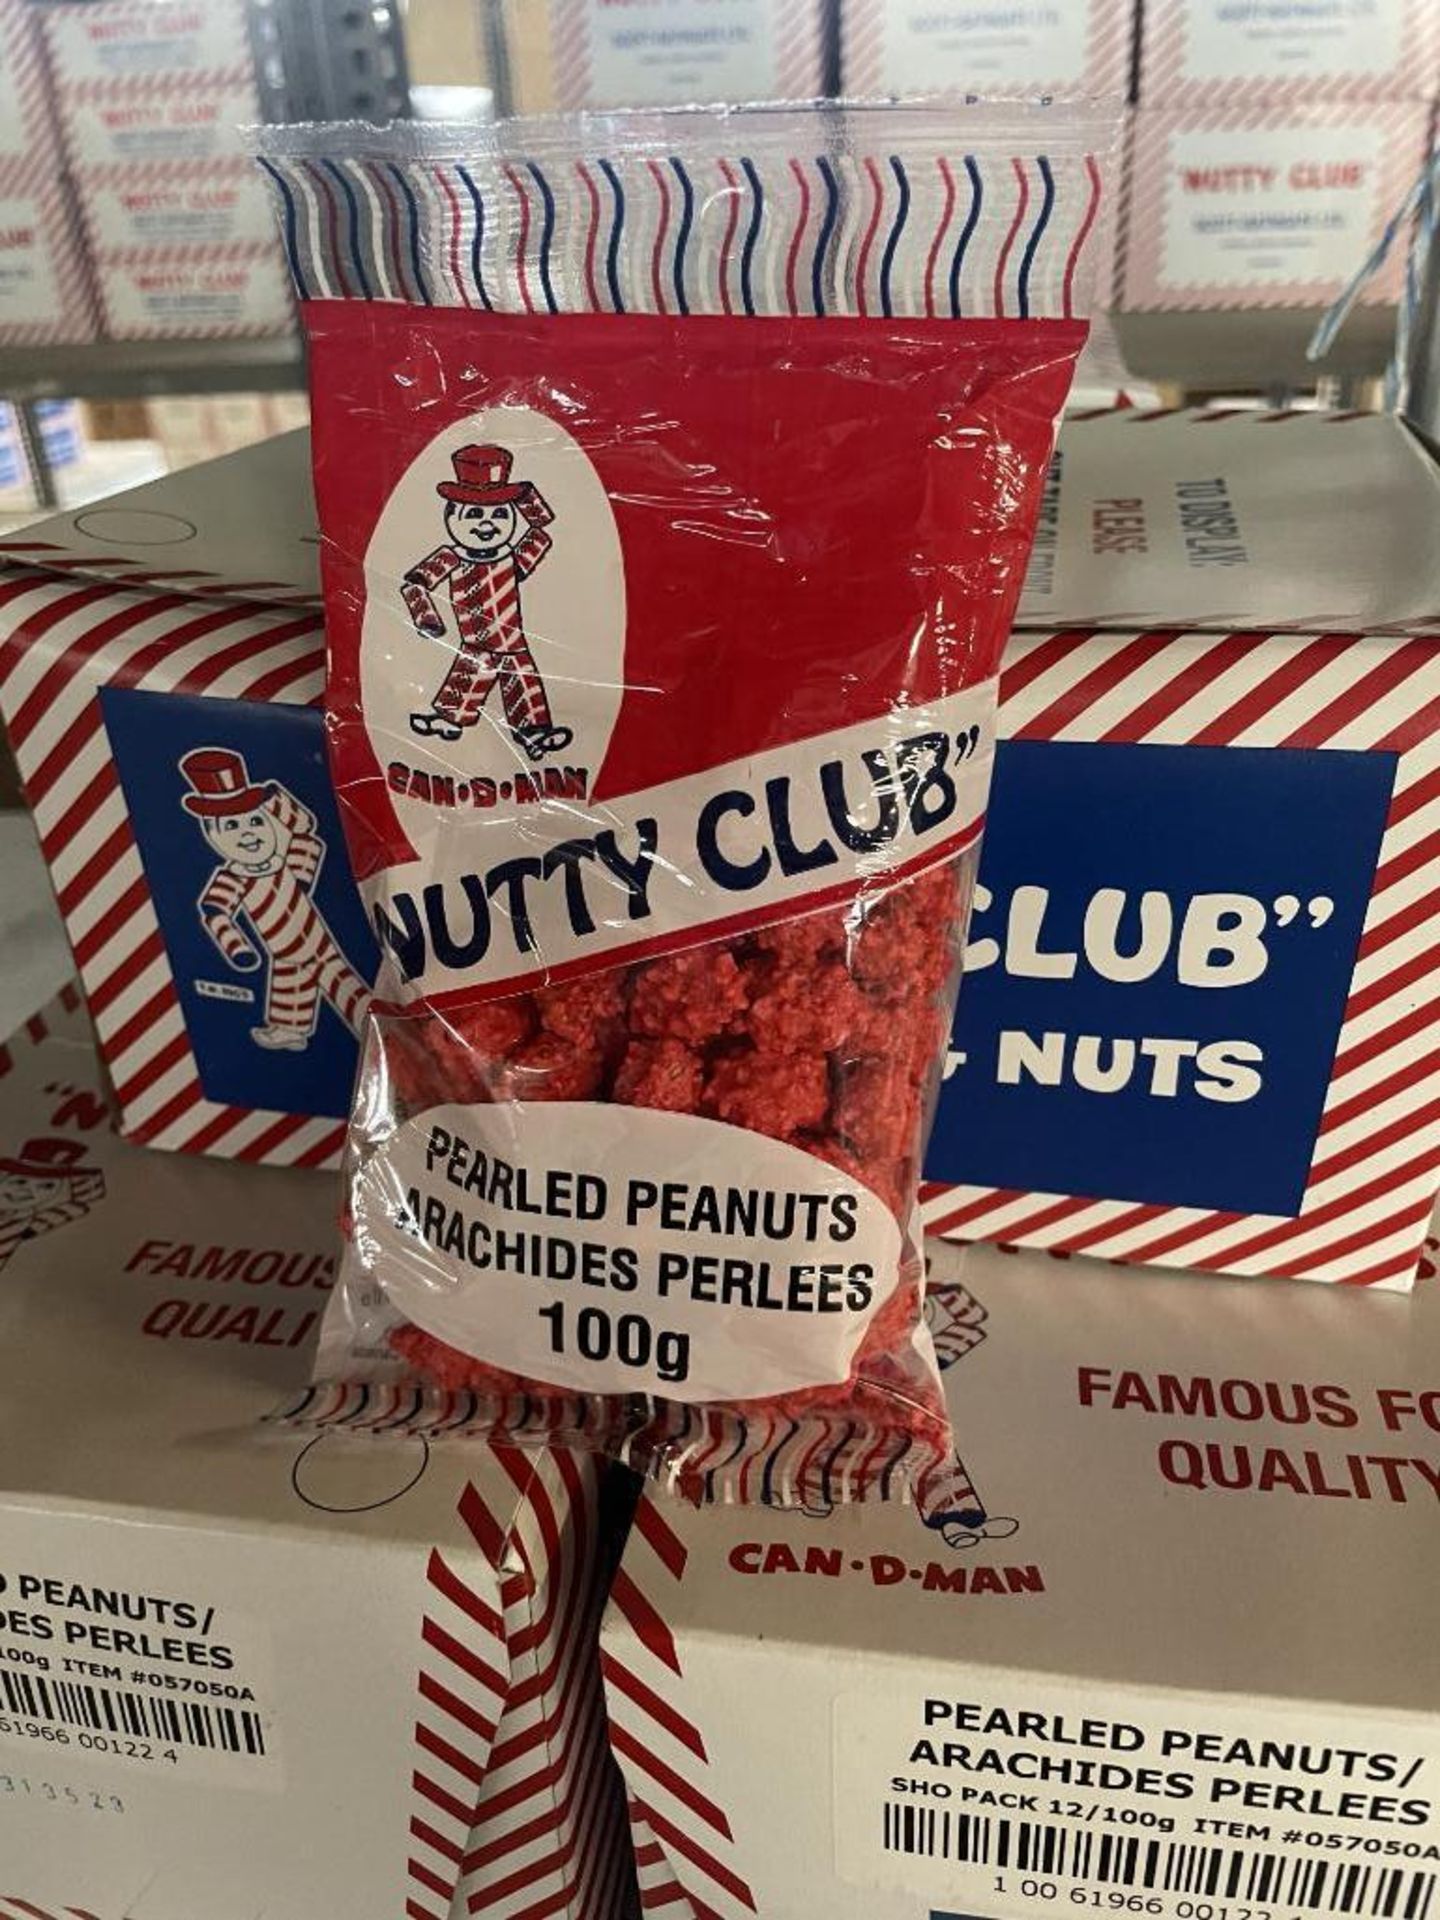 (10) BOXES OF NUTTY CLUB PEARLED PEANUTS, 12/100G PER BOX - Image 2 of 3